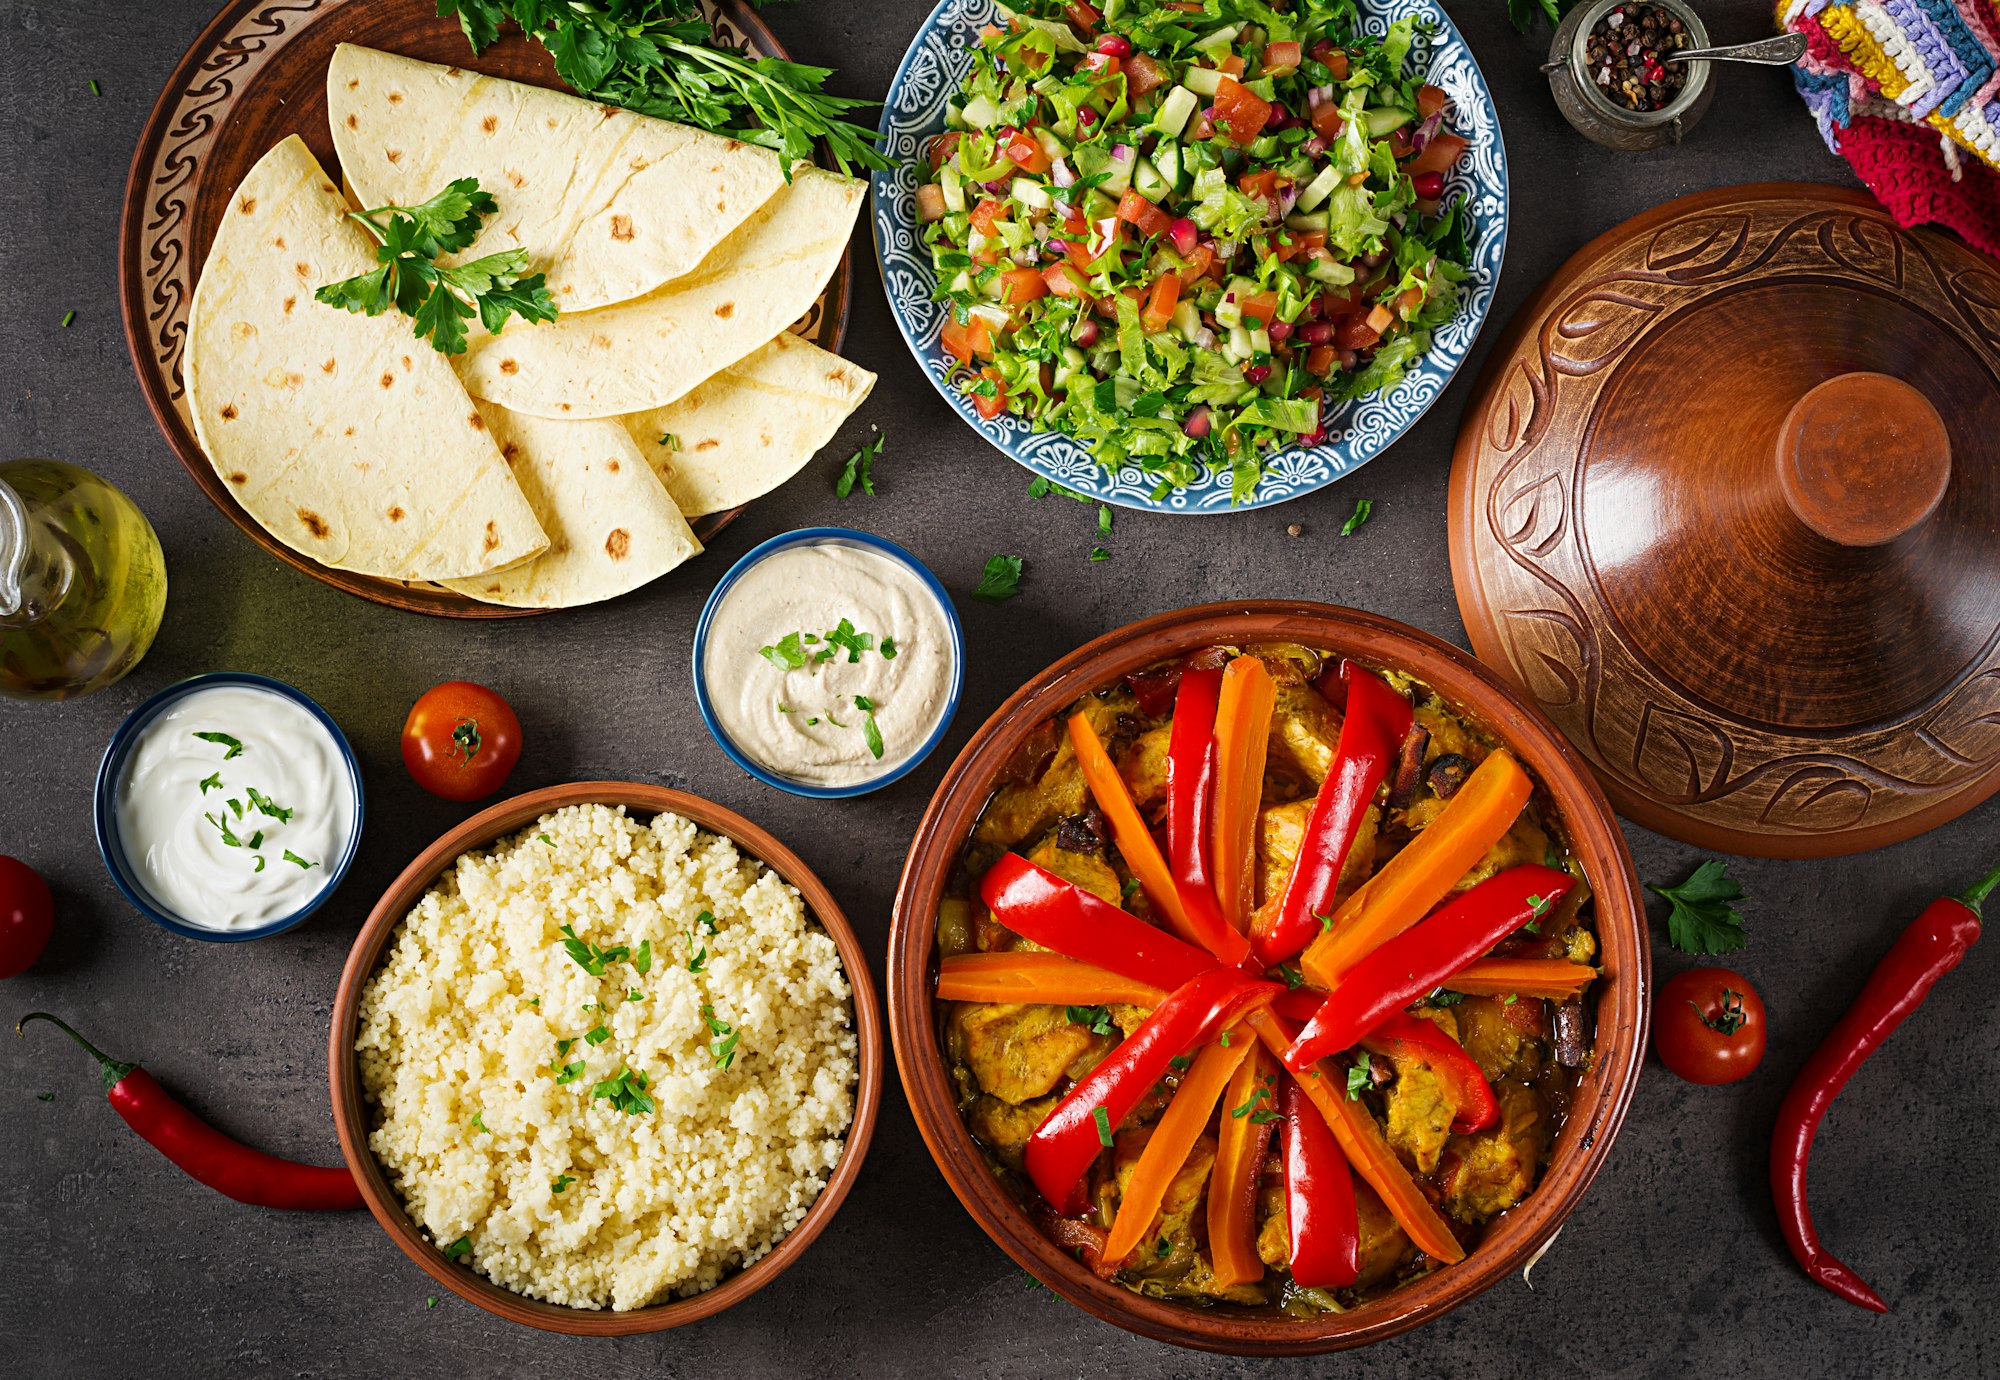 Moroccan food. Traditional tajine dishes, couscous and fresh salad on rustic wooden table.